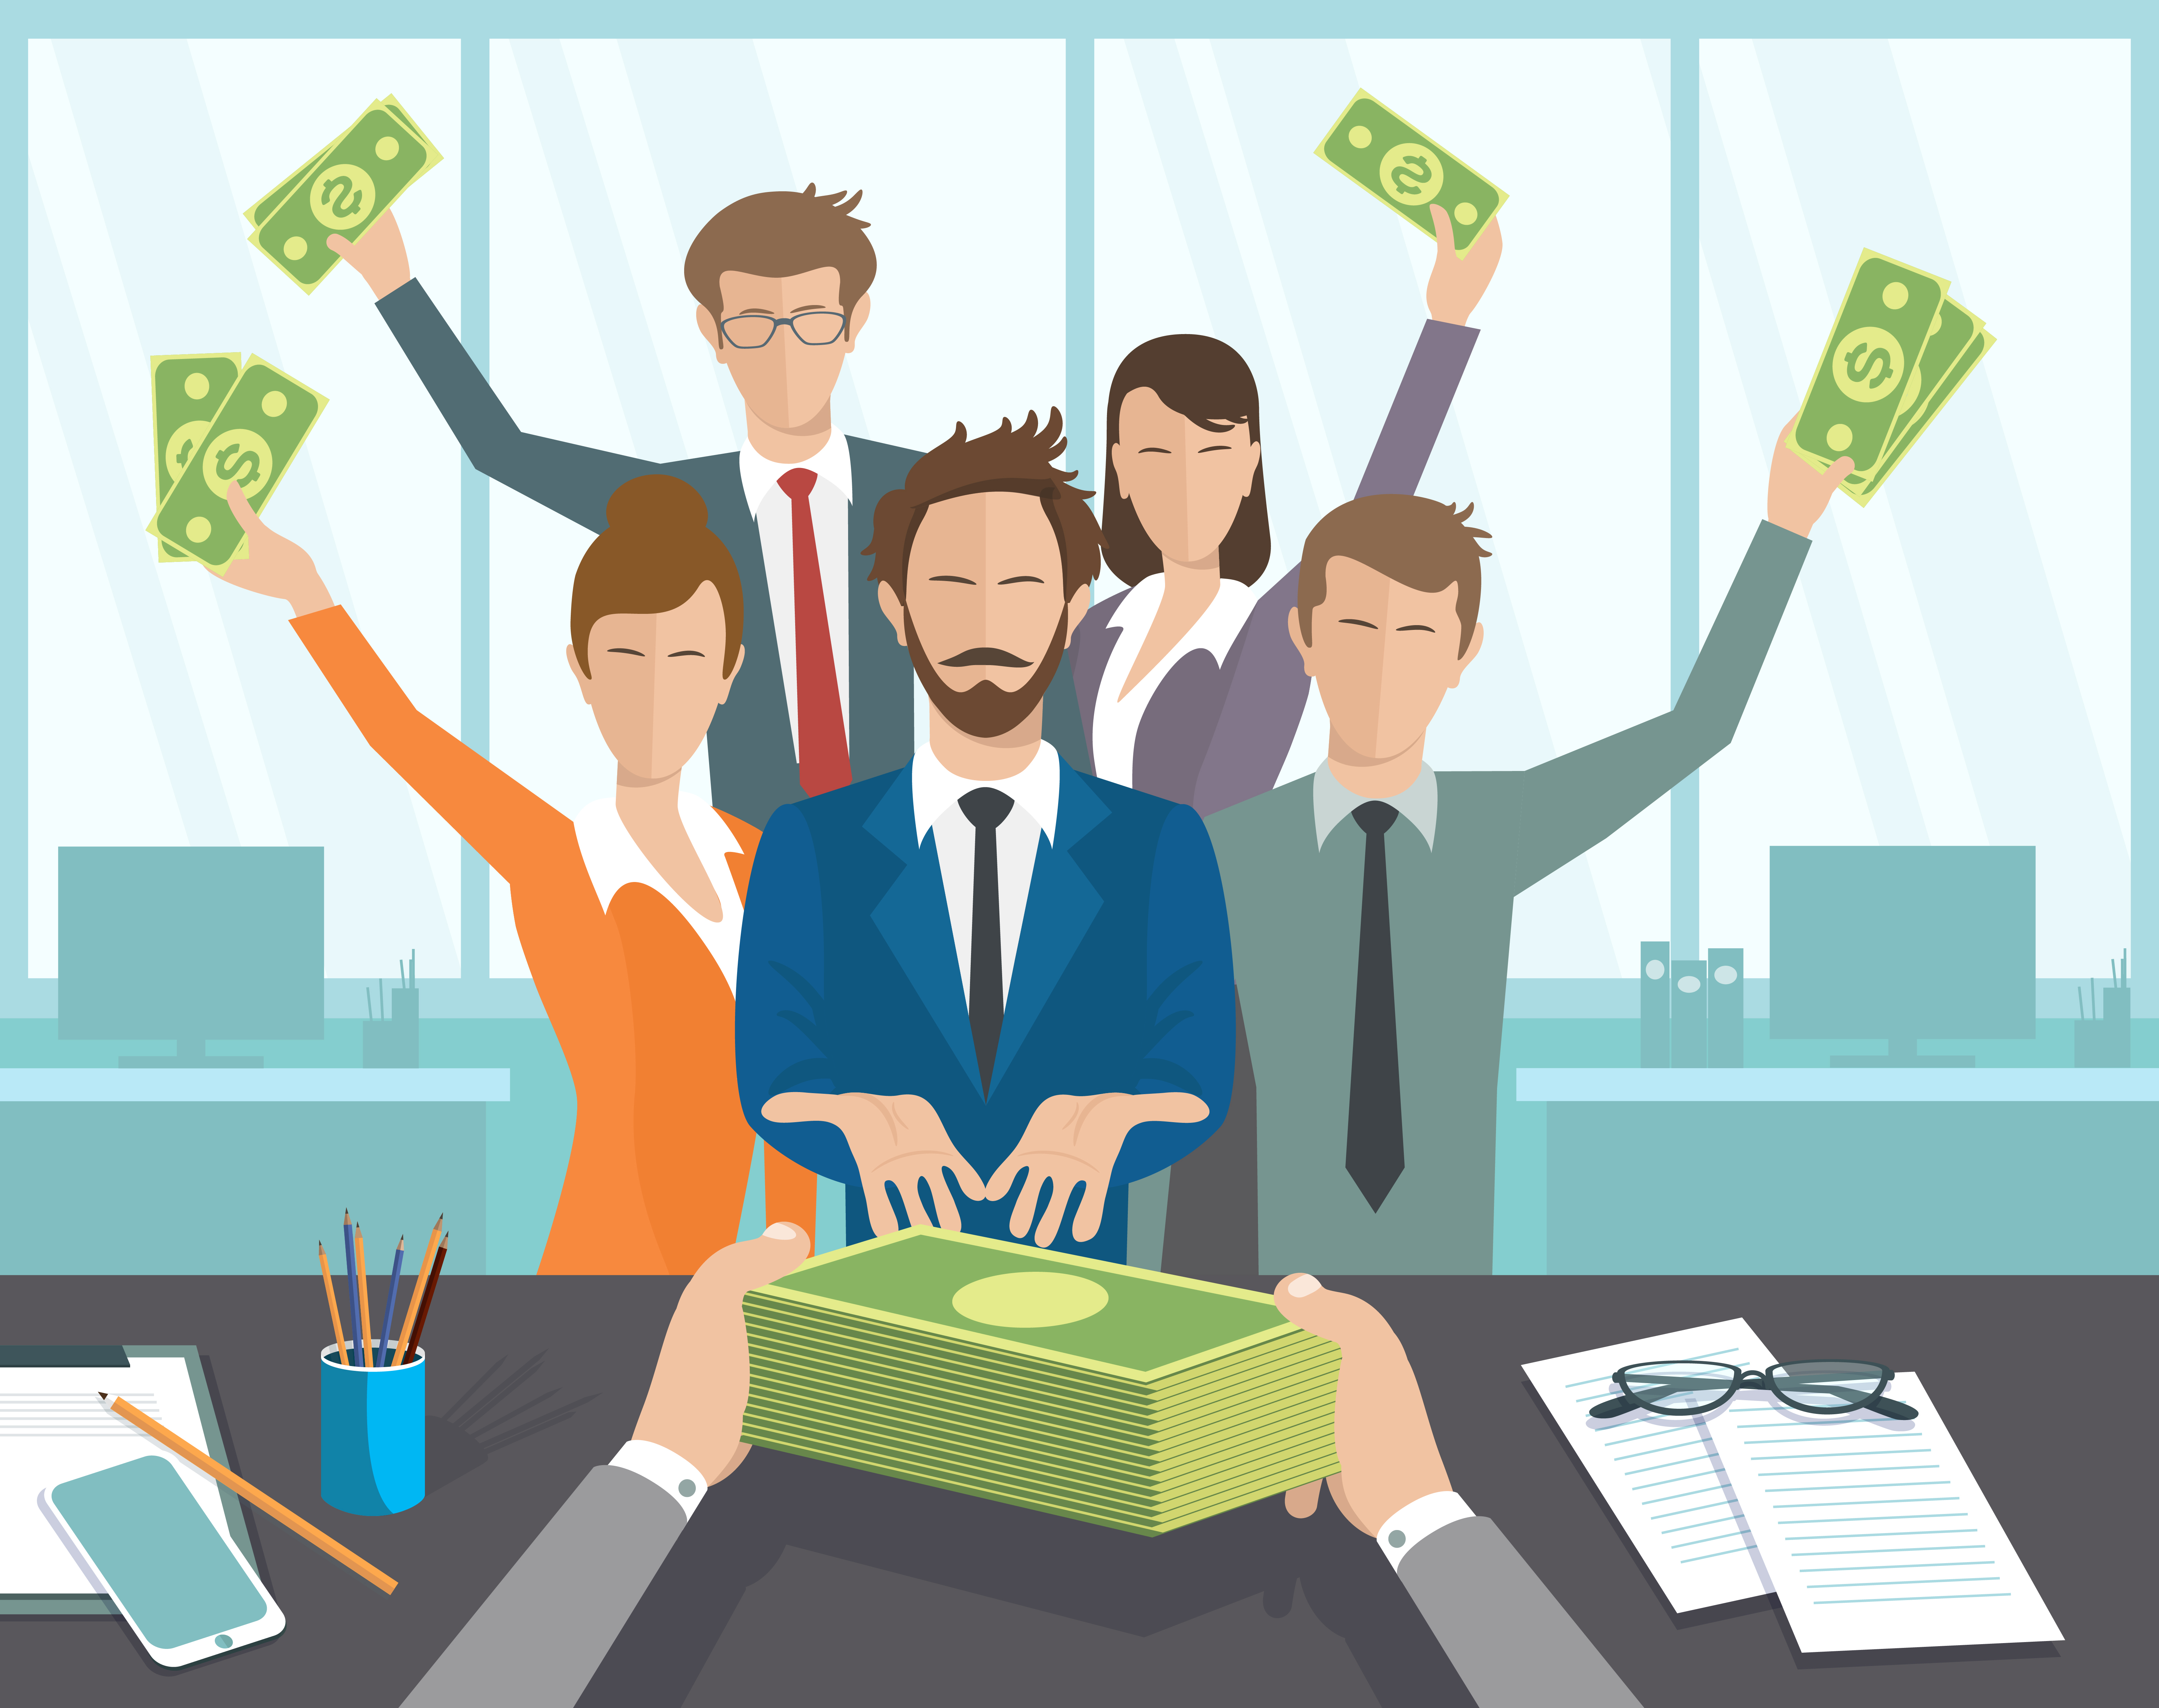 Salary--along with job history and certifications--are strong predictors of future performance, according to Ultimate Software (Illustration: Elegant Solution/Shutterstock)